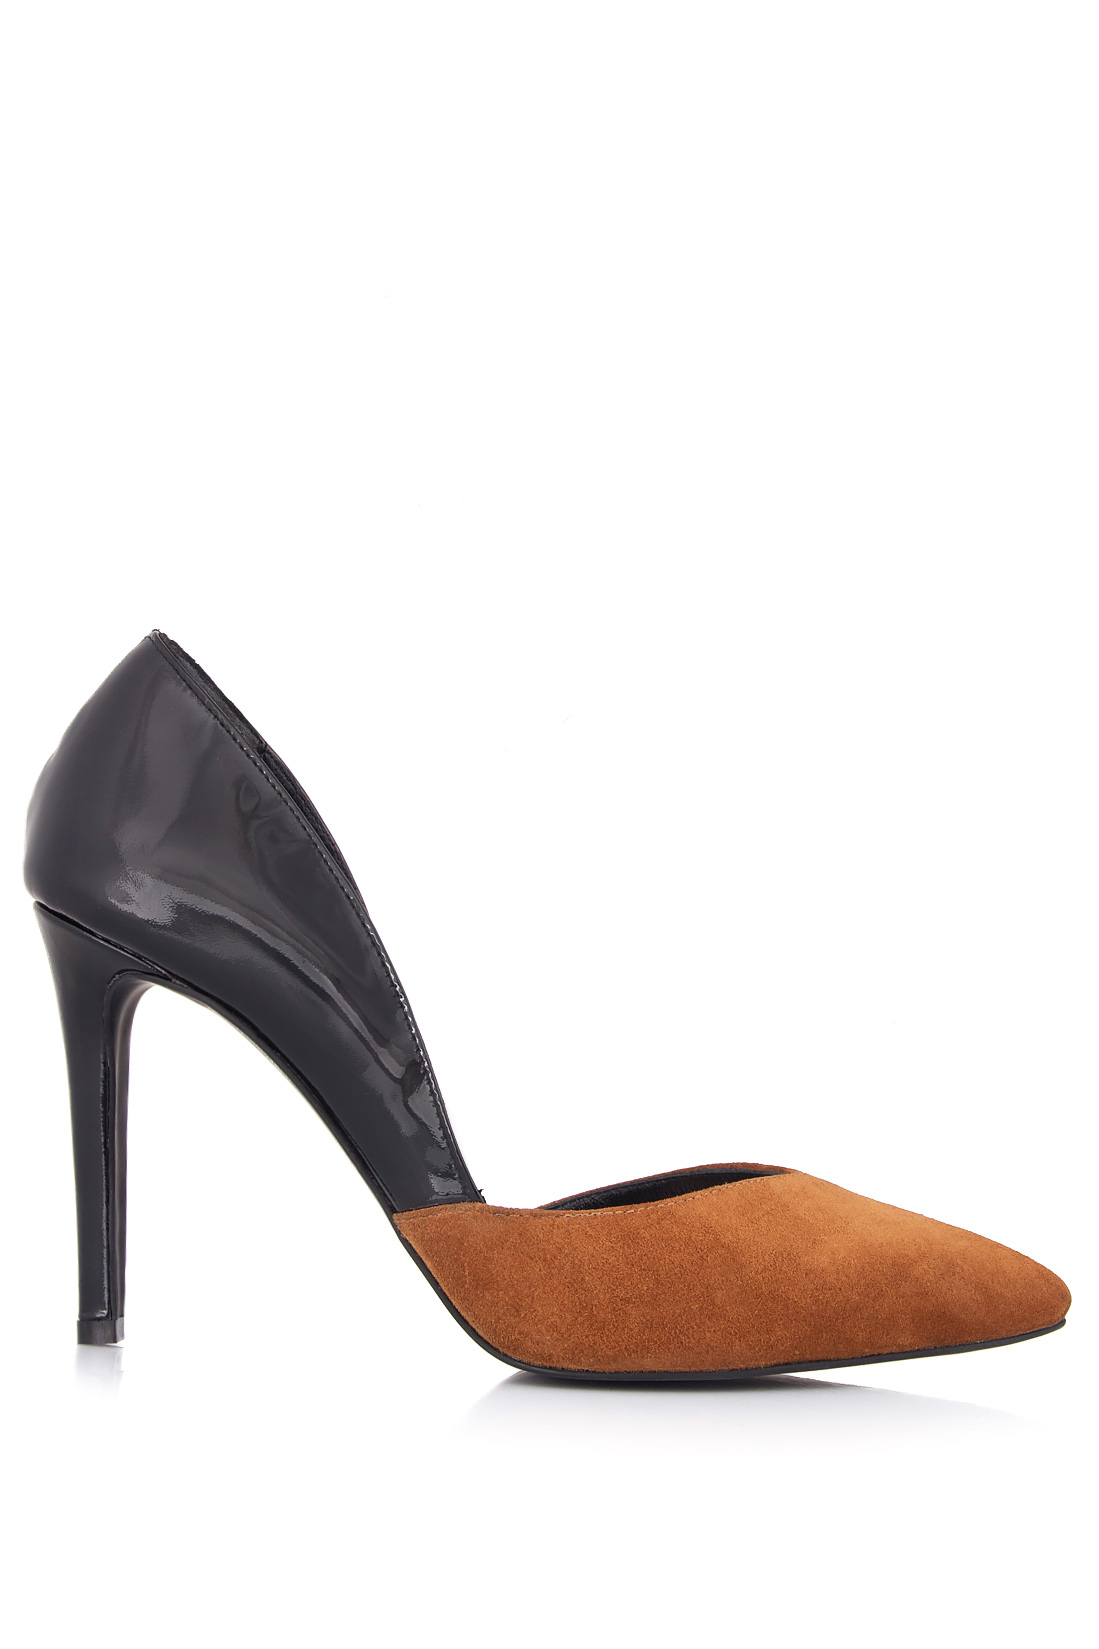 D'Orsay two-tone leather pumps Ana Kaloni image 0